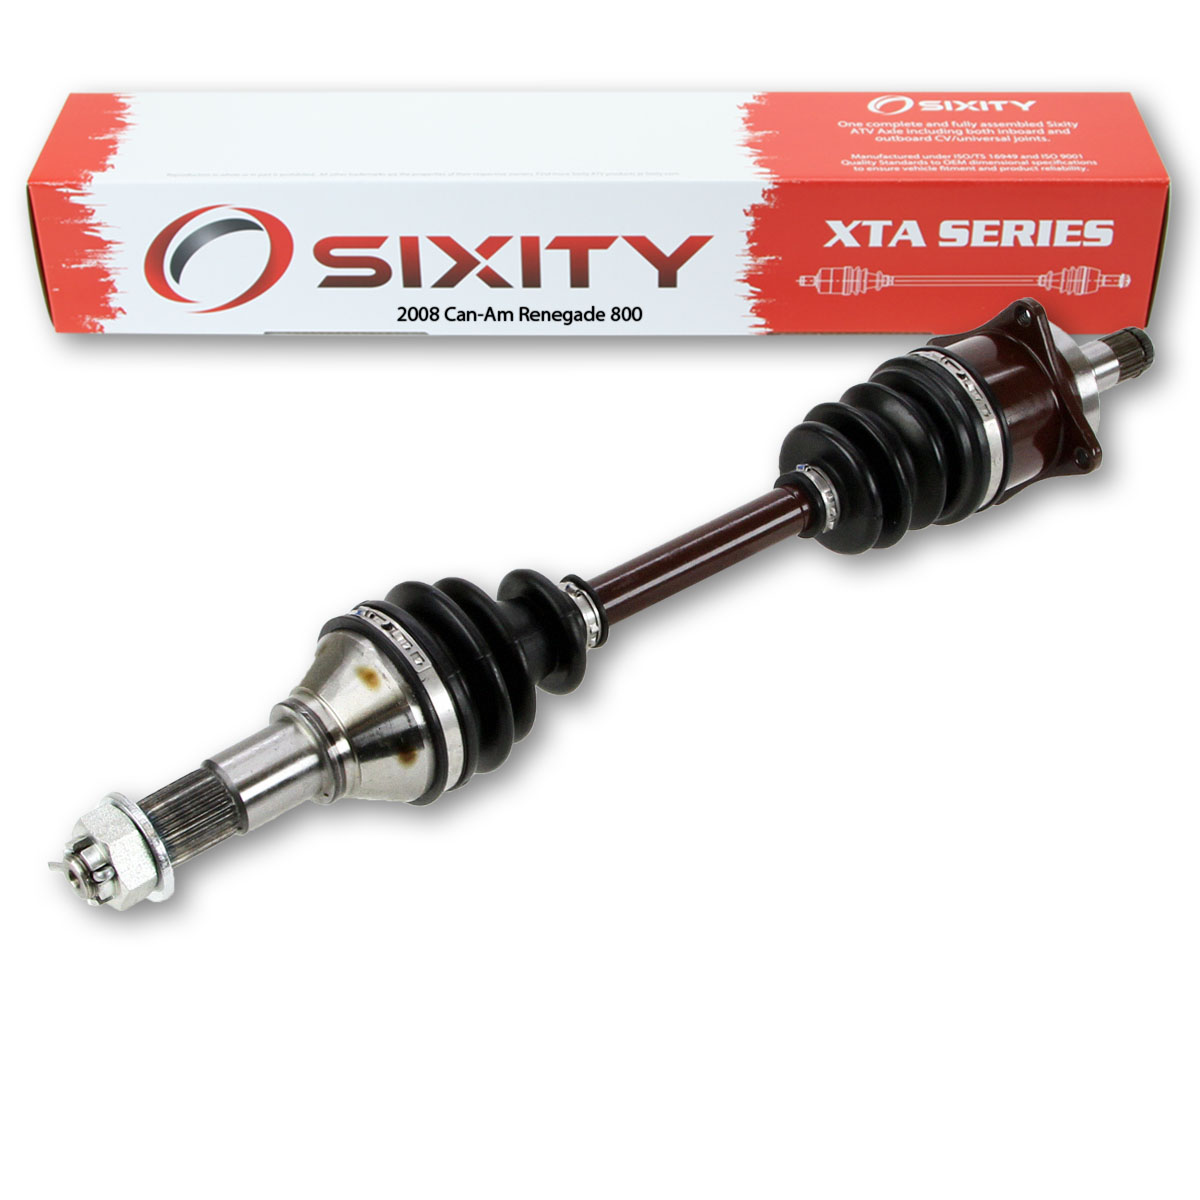 Sixity 2008 Can-Am Renegade 800 4X4 Front Left XTA ATV Axle